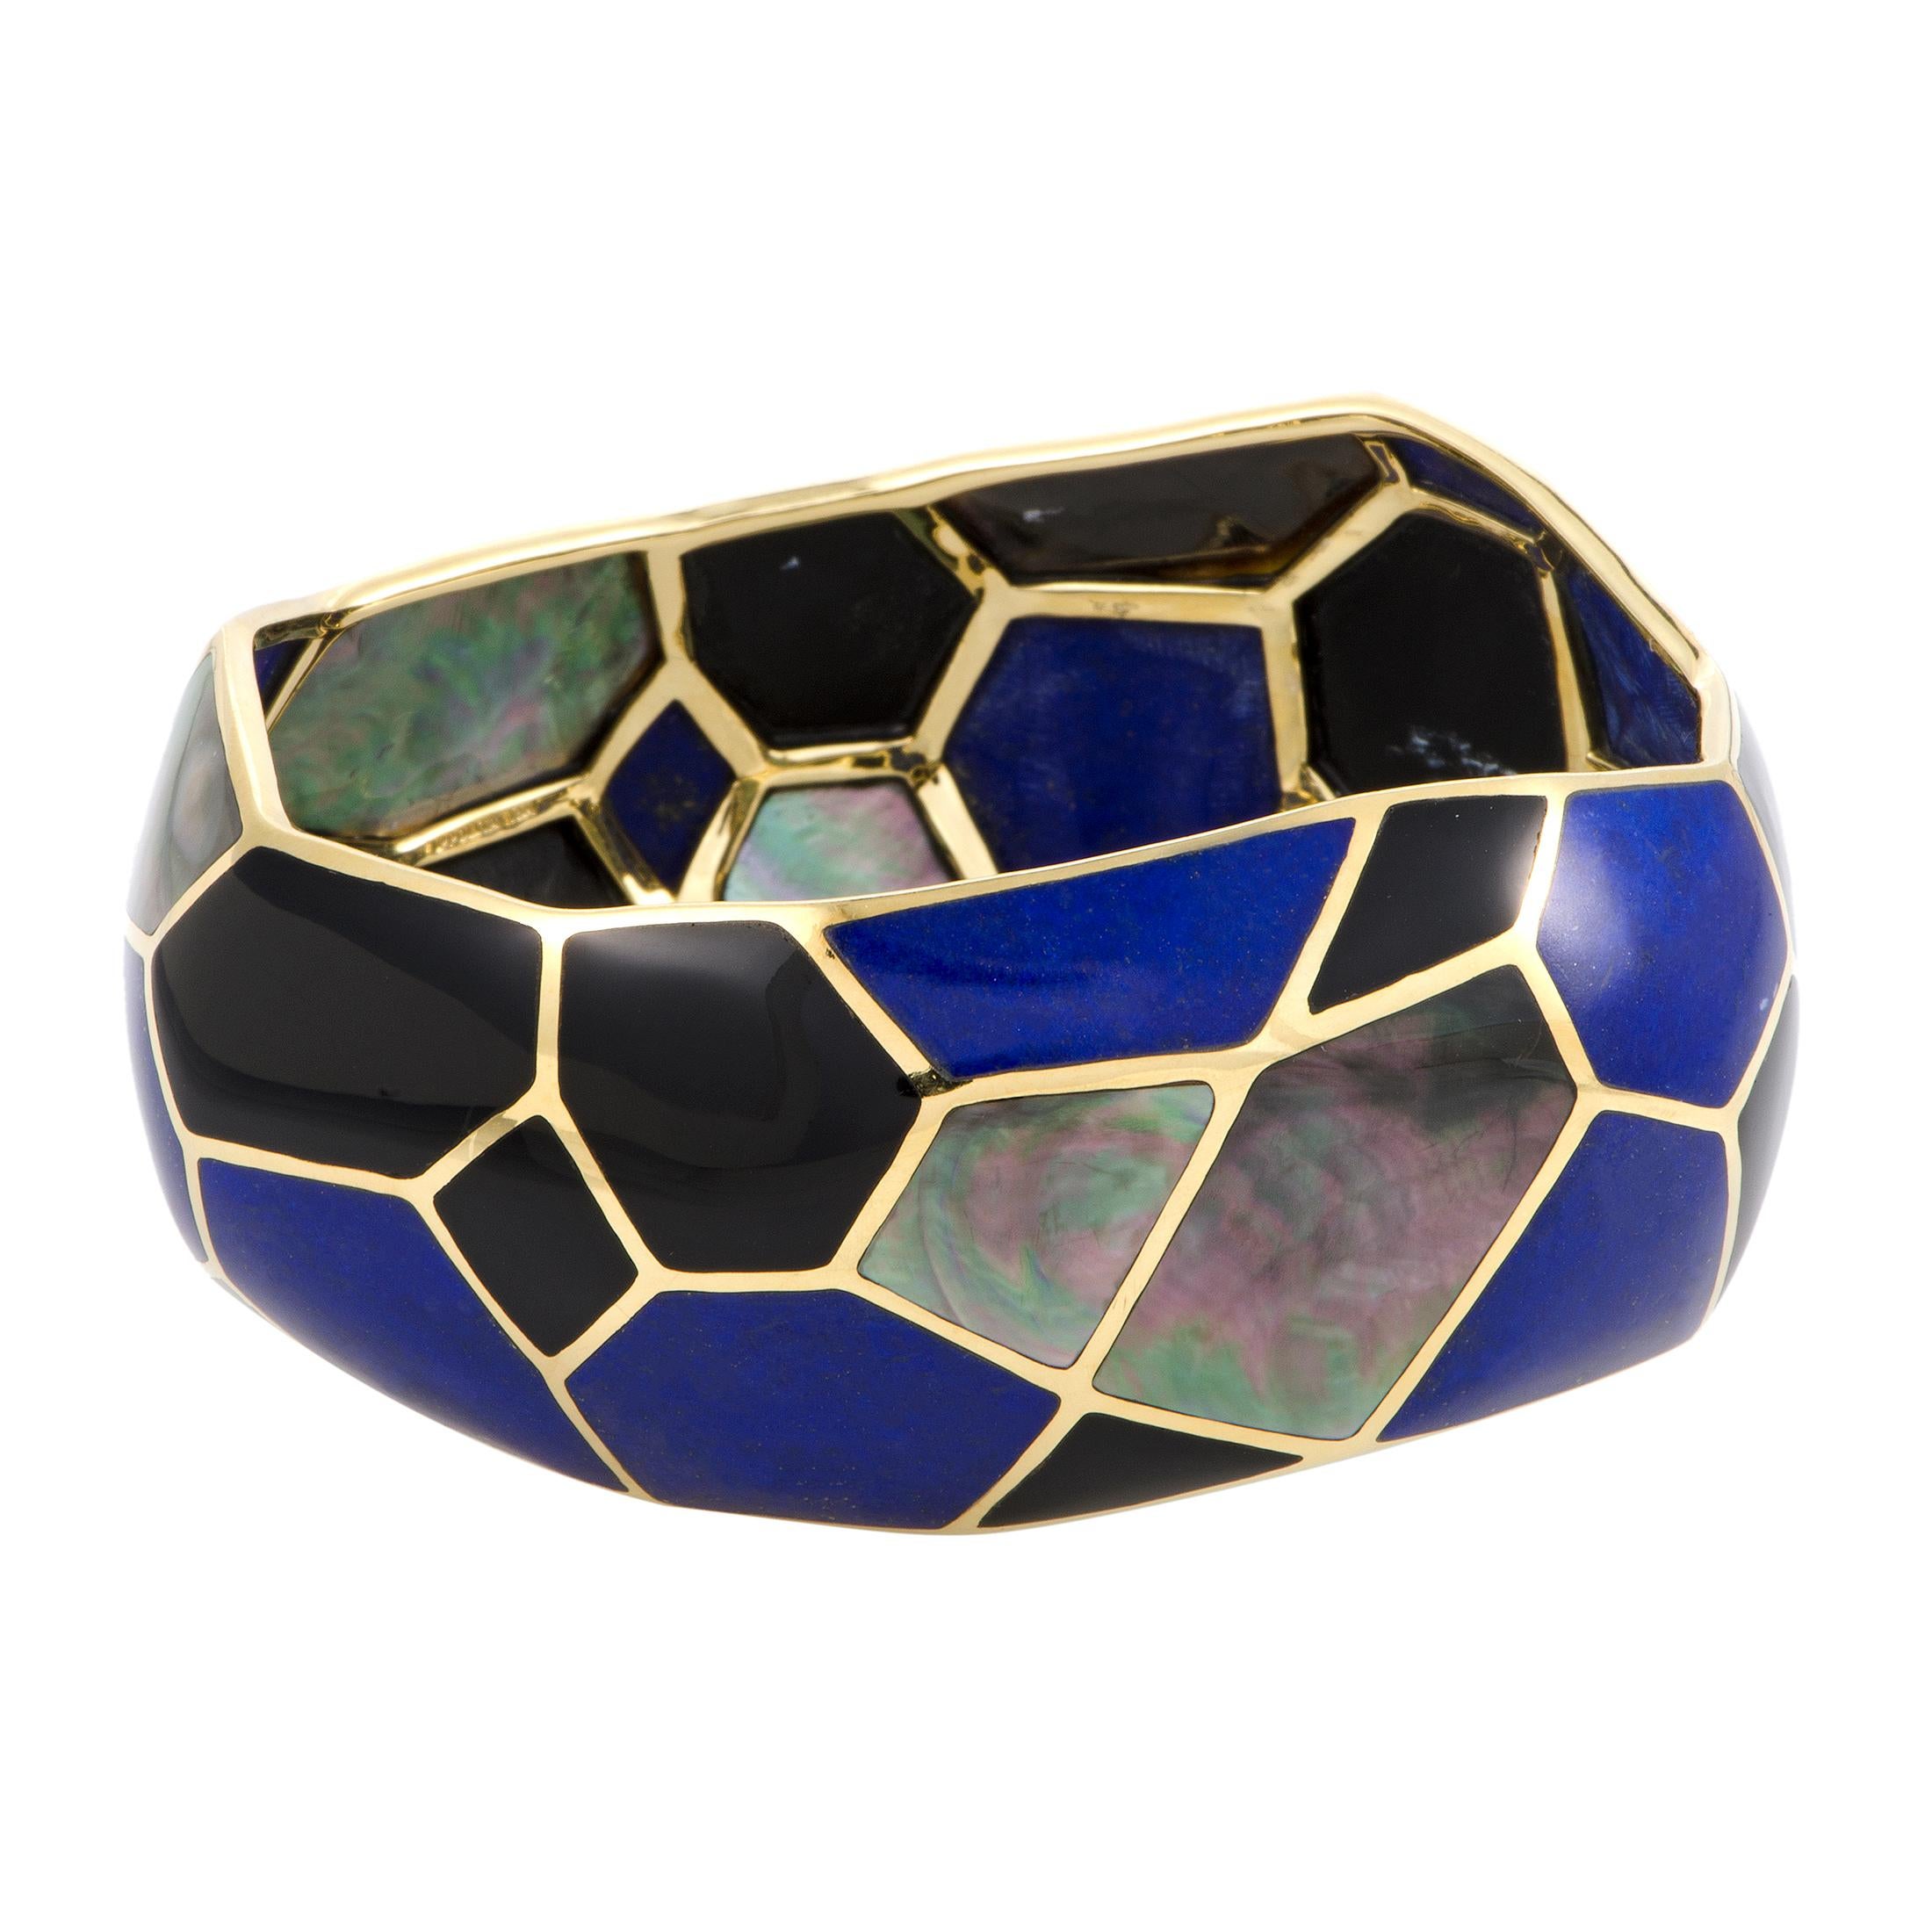 Polished Rock Candy 18 Karat Yellow Gold Mother of Pearl Onyx and Lapis Bangle